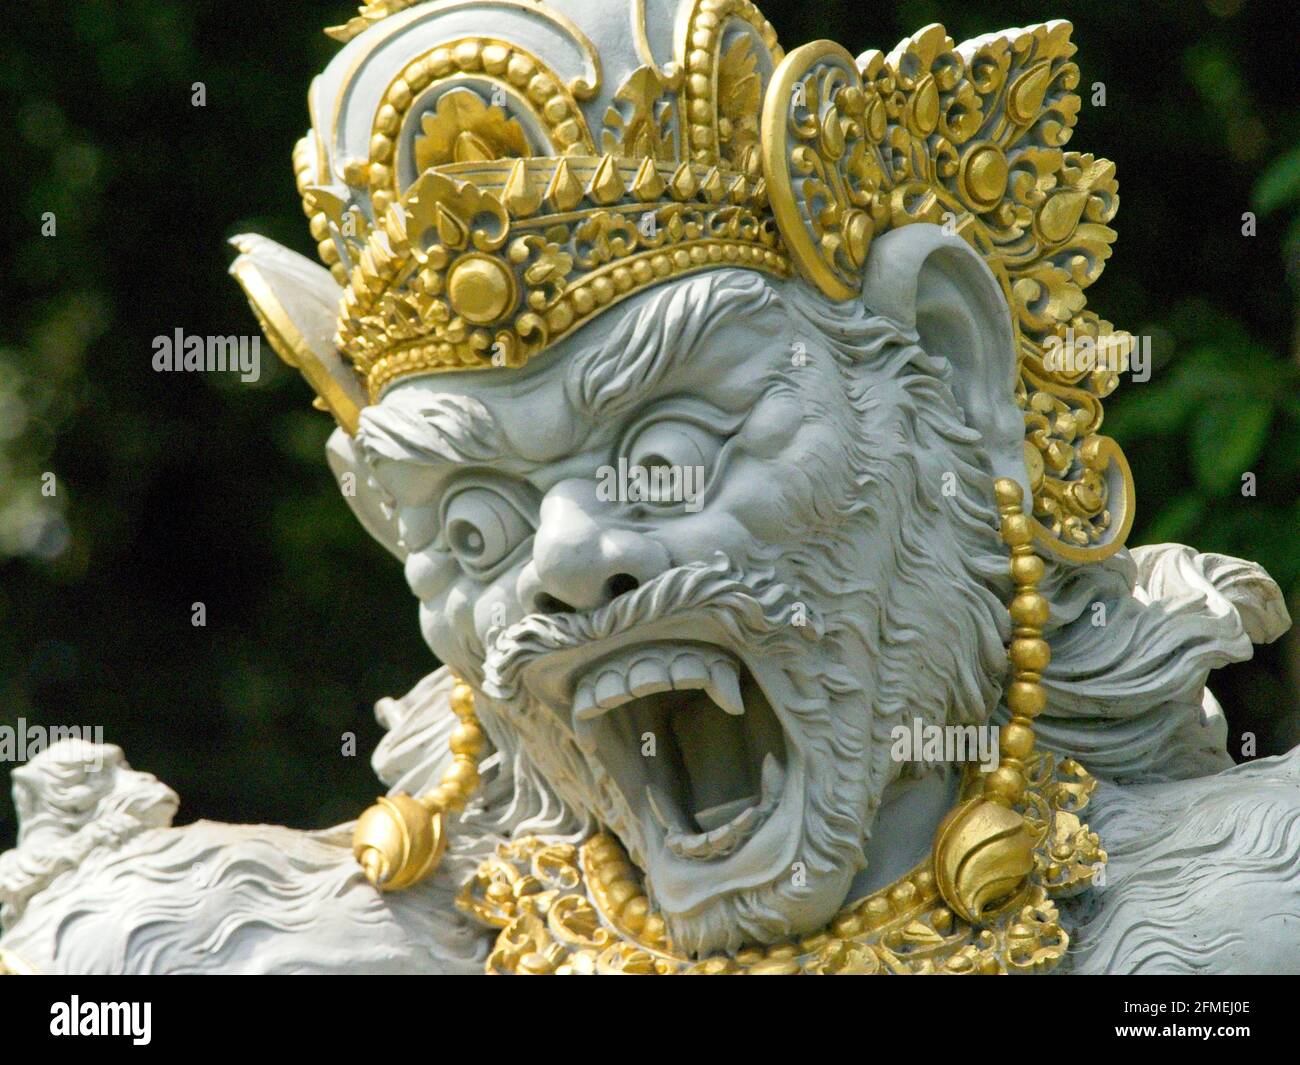 Closeup of golden Balinese mythology statue with scary face Bali, Indonesia. Stock Photo